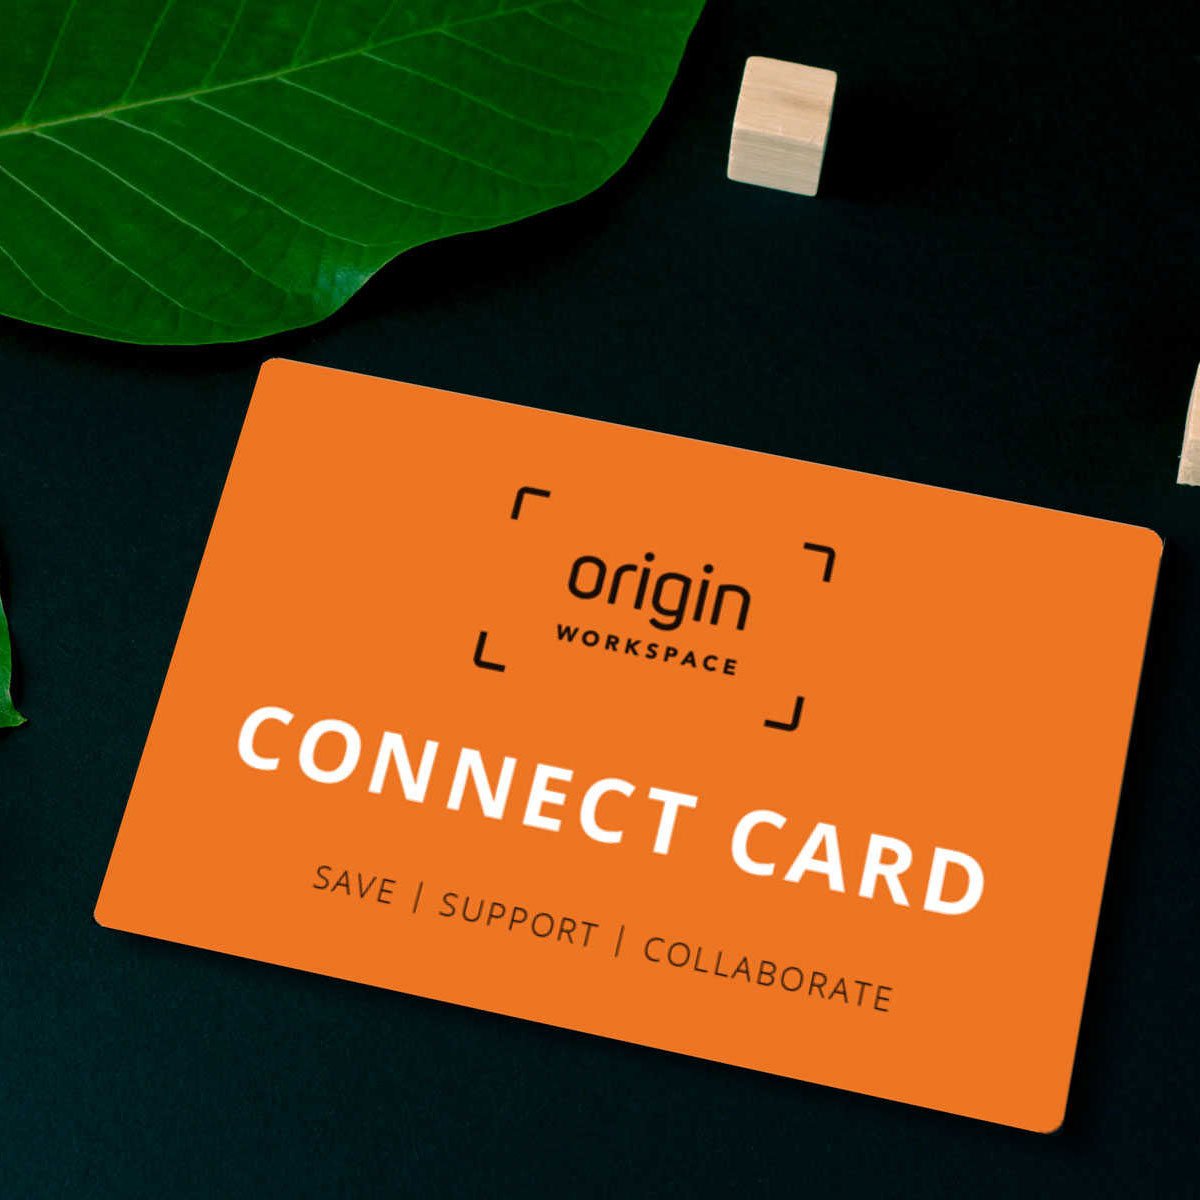 Launching the Origin Workspace Connect Card